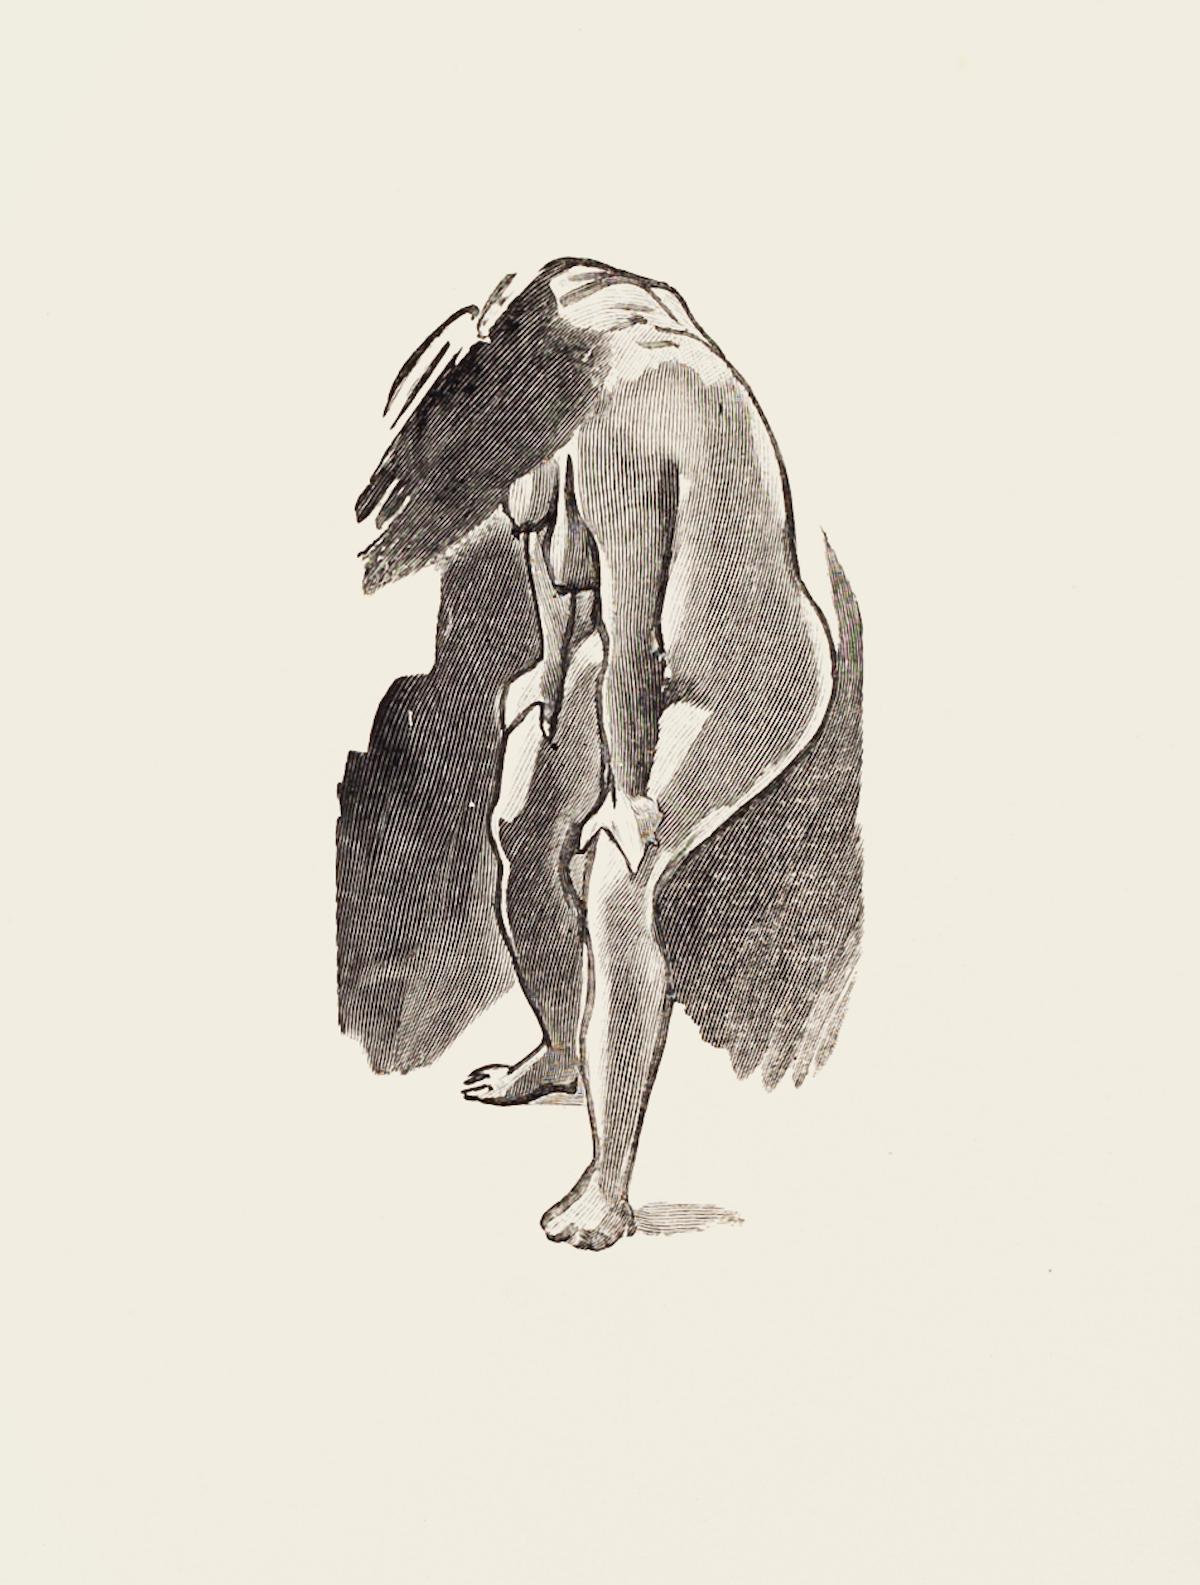 Posing Nude is an original zincography artwork realized by Mino Maccari.

Included a white Passepartout: 49 x 34

The state of preservation is very good.




The artwork represents a nude posing woman, characterized by strong and confident